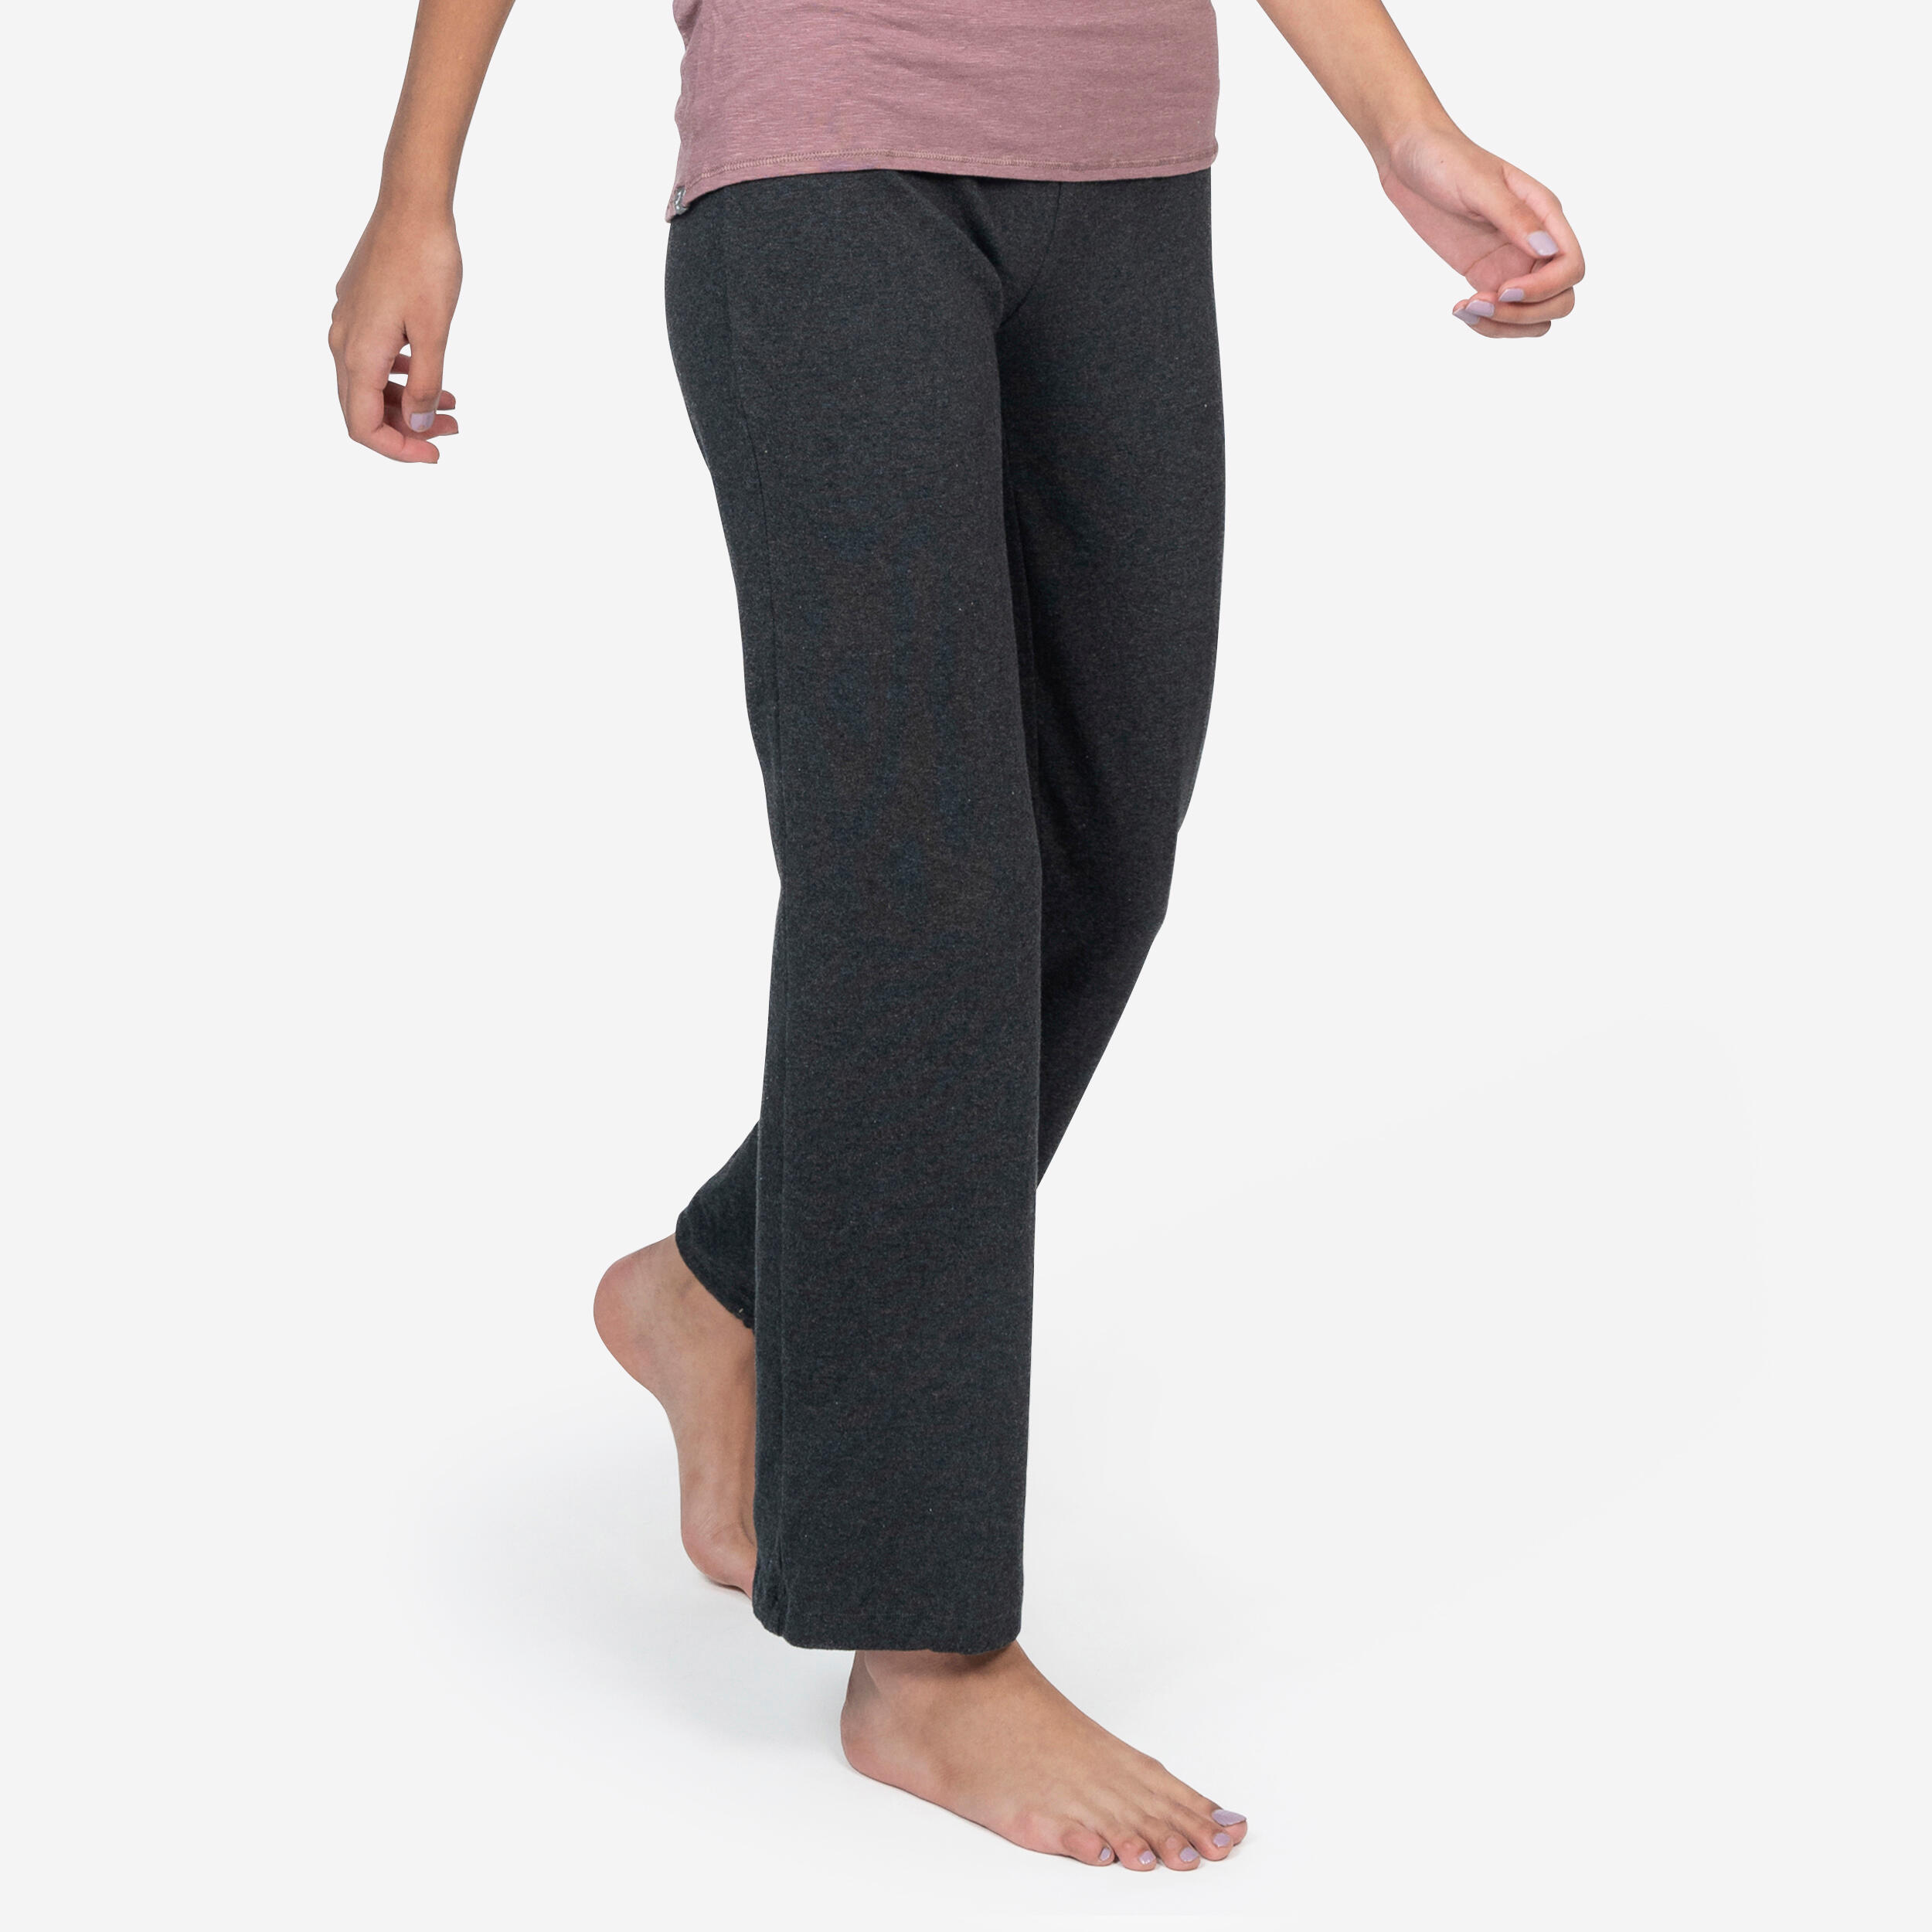 Buy Bootcut Yoga Pants Online In India  Etsy India